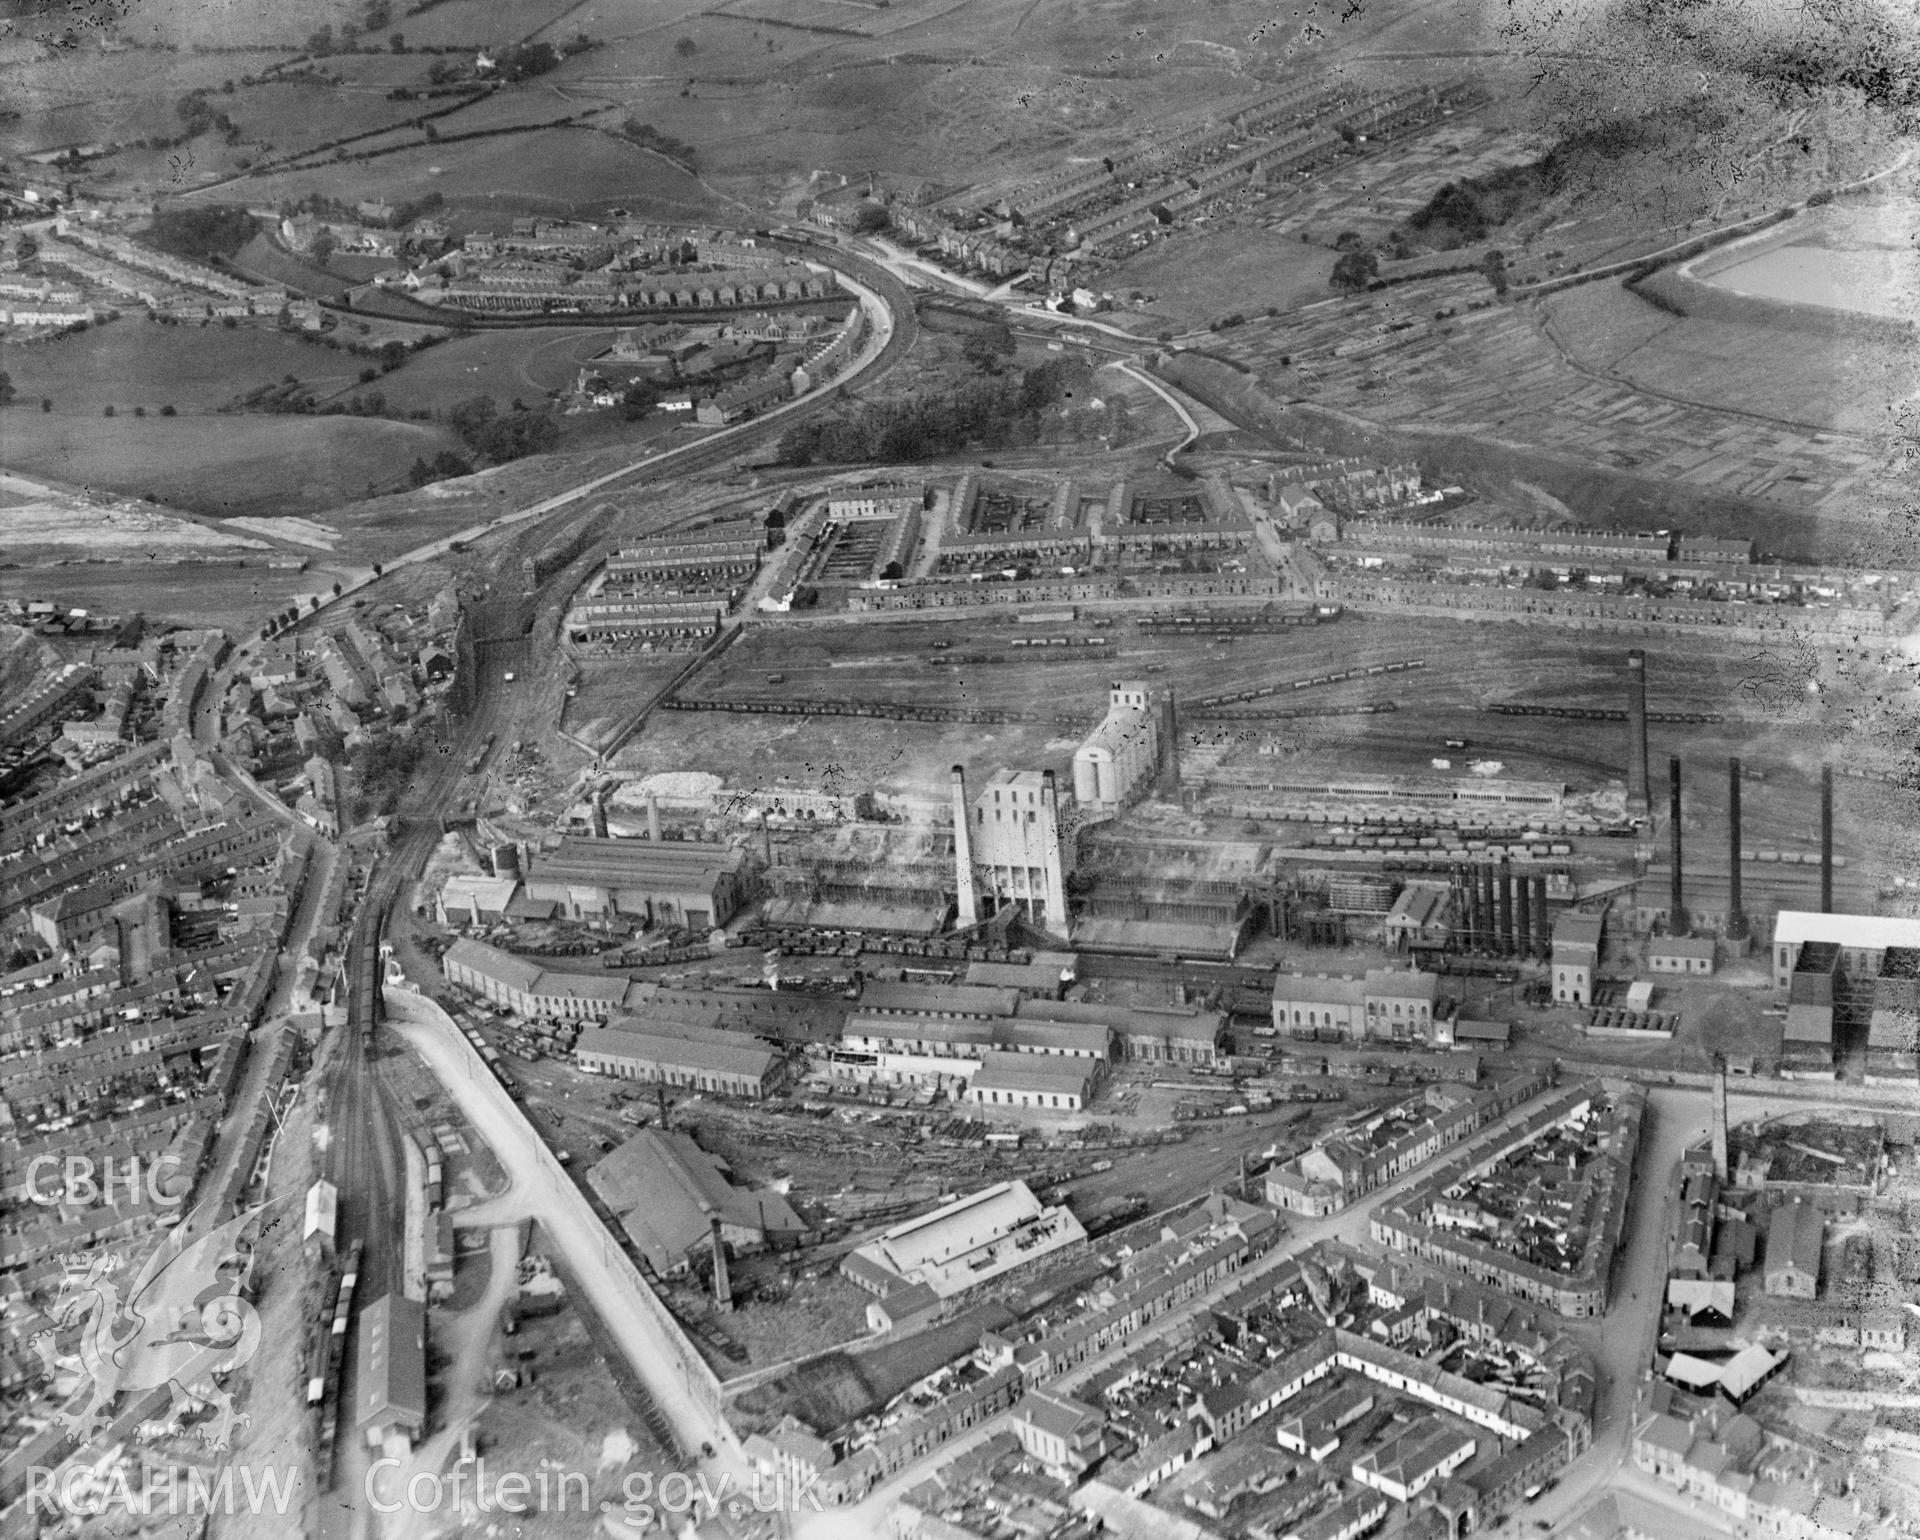 View of Guest, Keen  & Nettlefold, Dowlais Works Merthyr Tydfil, oblique aerial view. 5?x4? black and white glass plate negative.